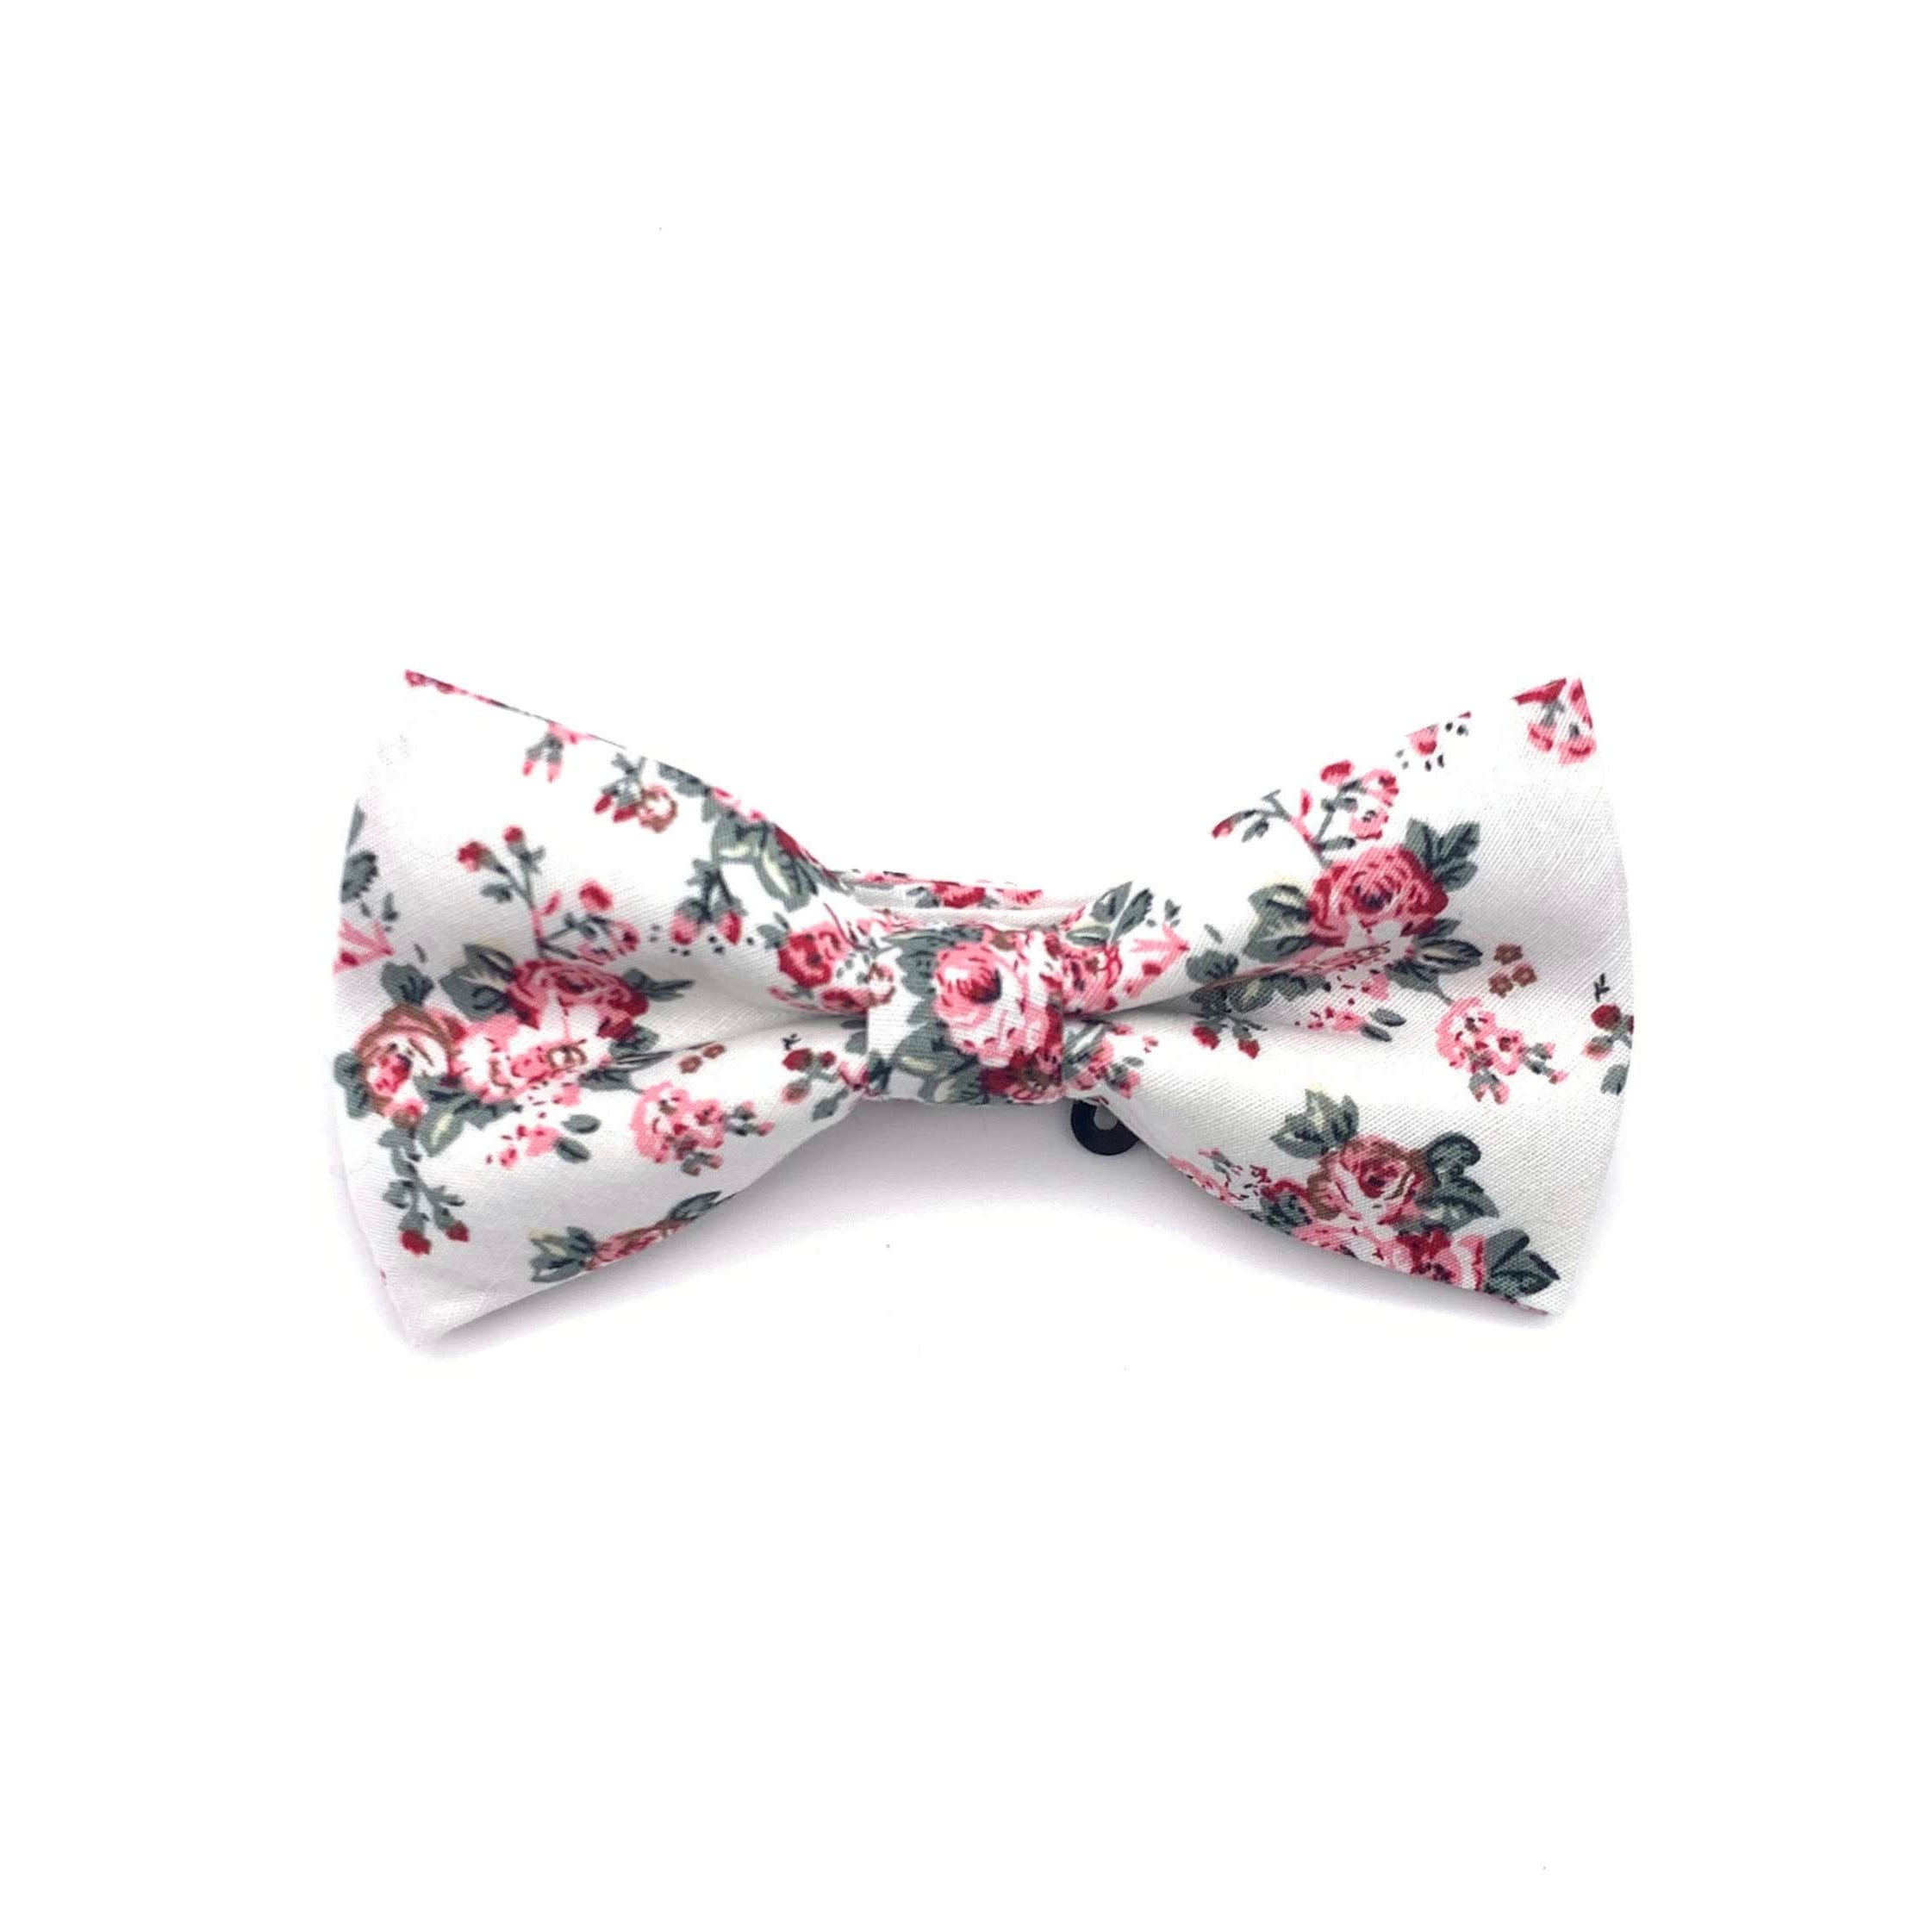 White Floral Bow Tie with Pink Flowers for Men (ABDIEL)-White Floral Bow Tie (Pre-tied) 100% Cotton Flannel Handmade Adjustable to fit most neck sizes 13 3/4&quot; - 18&quot; Color: White Great for Prom Dinners Interviews Photo shoots Photo sessions Dates Groom to stand out between his Groomsmen pair them up with neckties while he wears the Floral bow tie. Floral bow tie for weddings and events. Great anniversary present and gift. Also great gift for the groom and his groomsmen to wear at the wedding, and